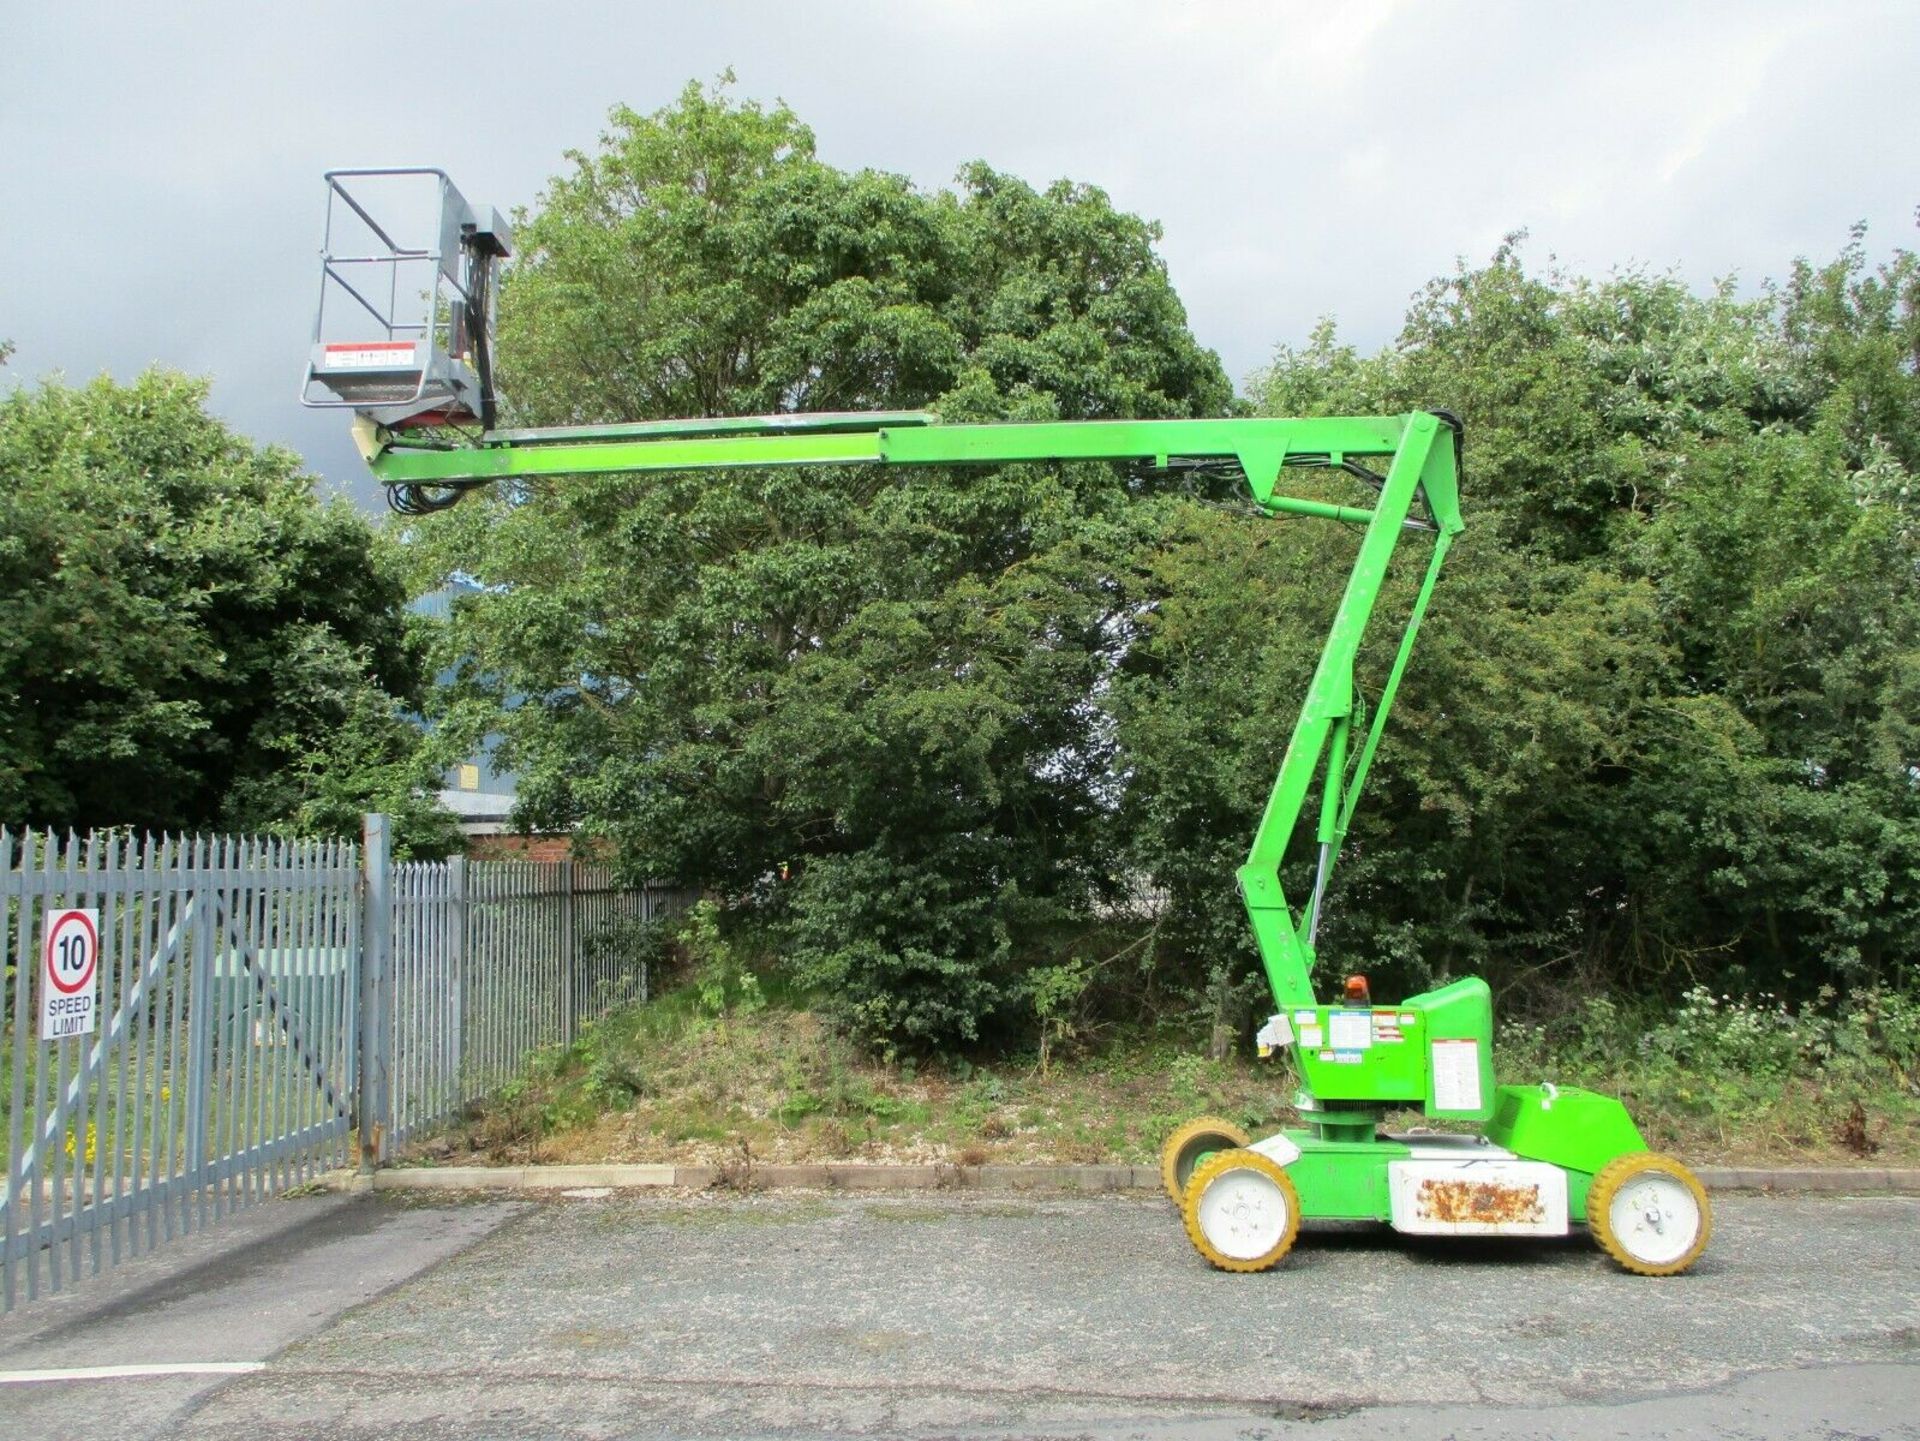 Nifty lift HR12 Self Propelled Access Platform 2007 - Image 2 of 12